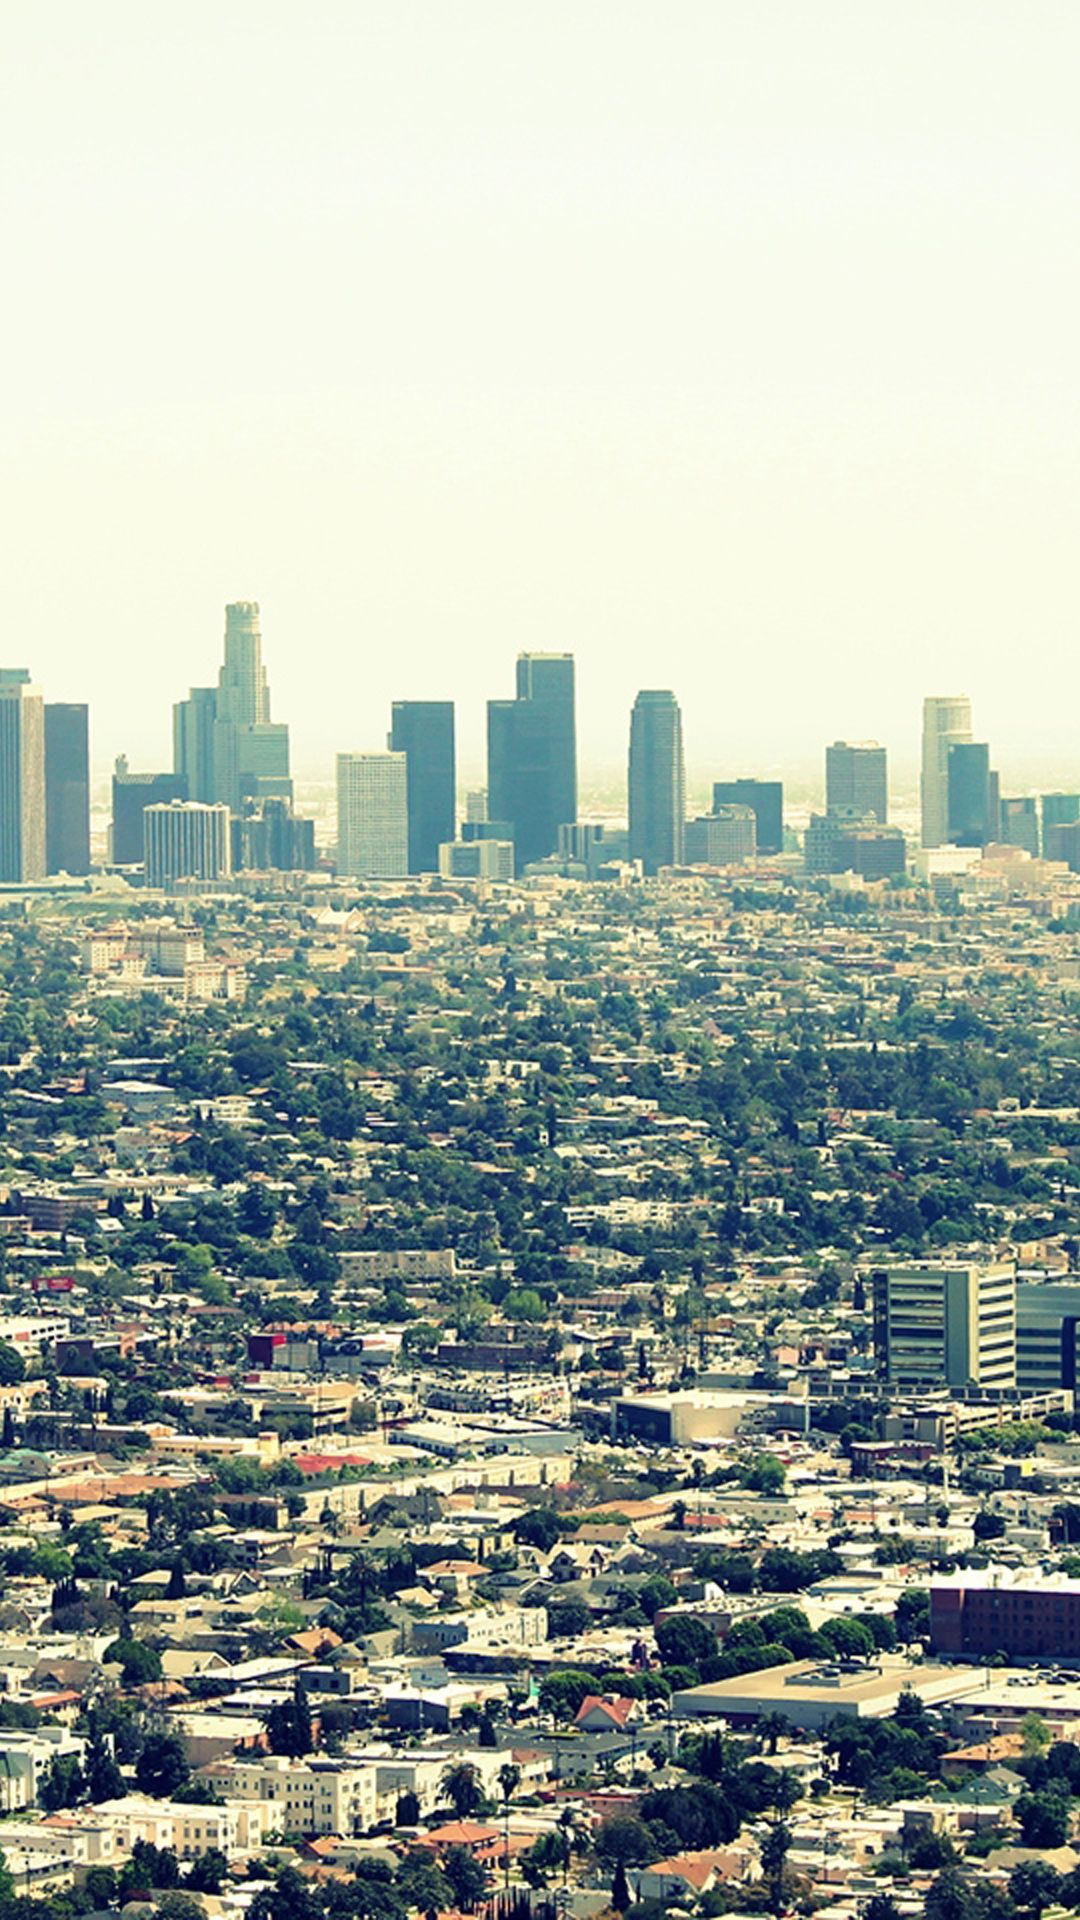 Los Angeles Wallpaper for iPhone iPhone 7 plus, iPhone 6 plus. HD wallpaper iphone, Los angeles wallpaper, iPhone wallpaper